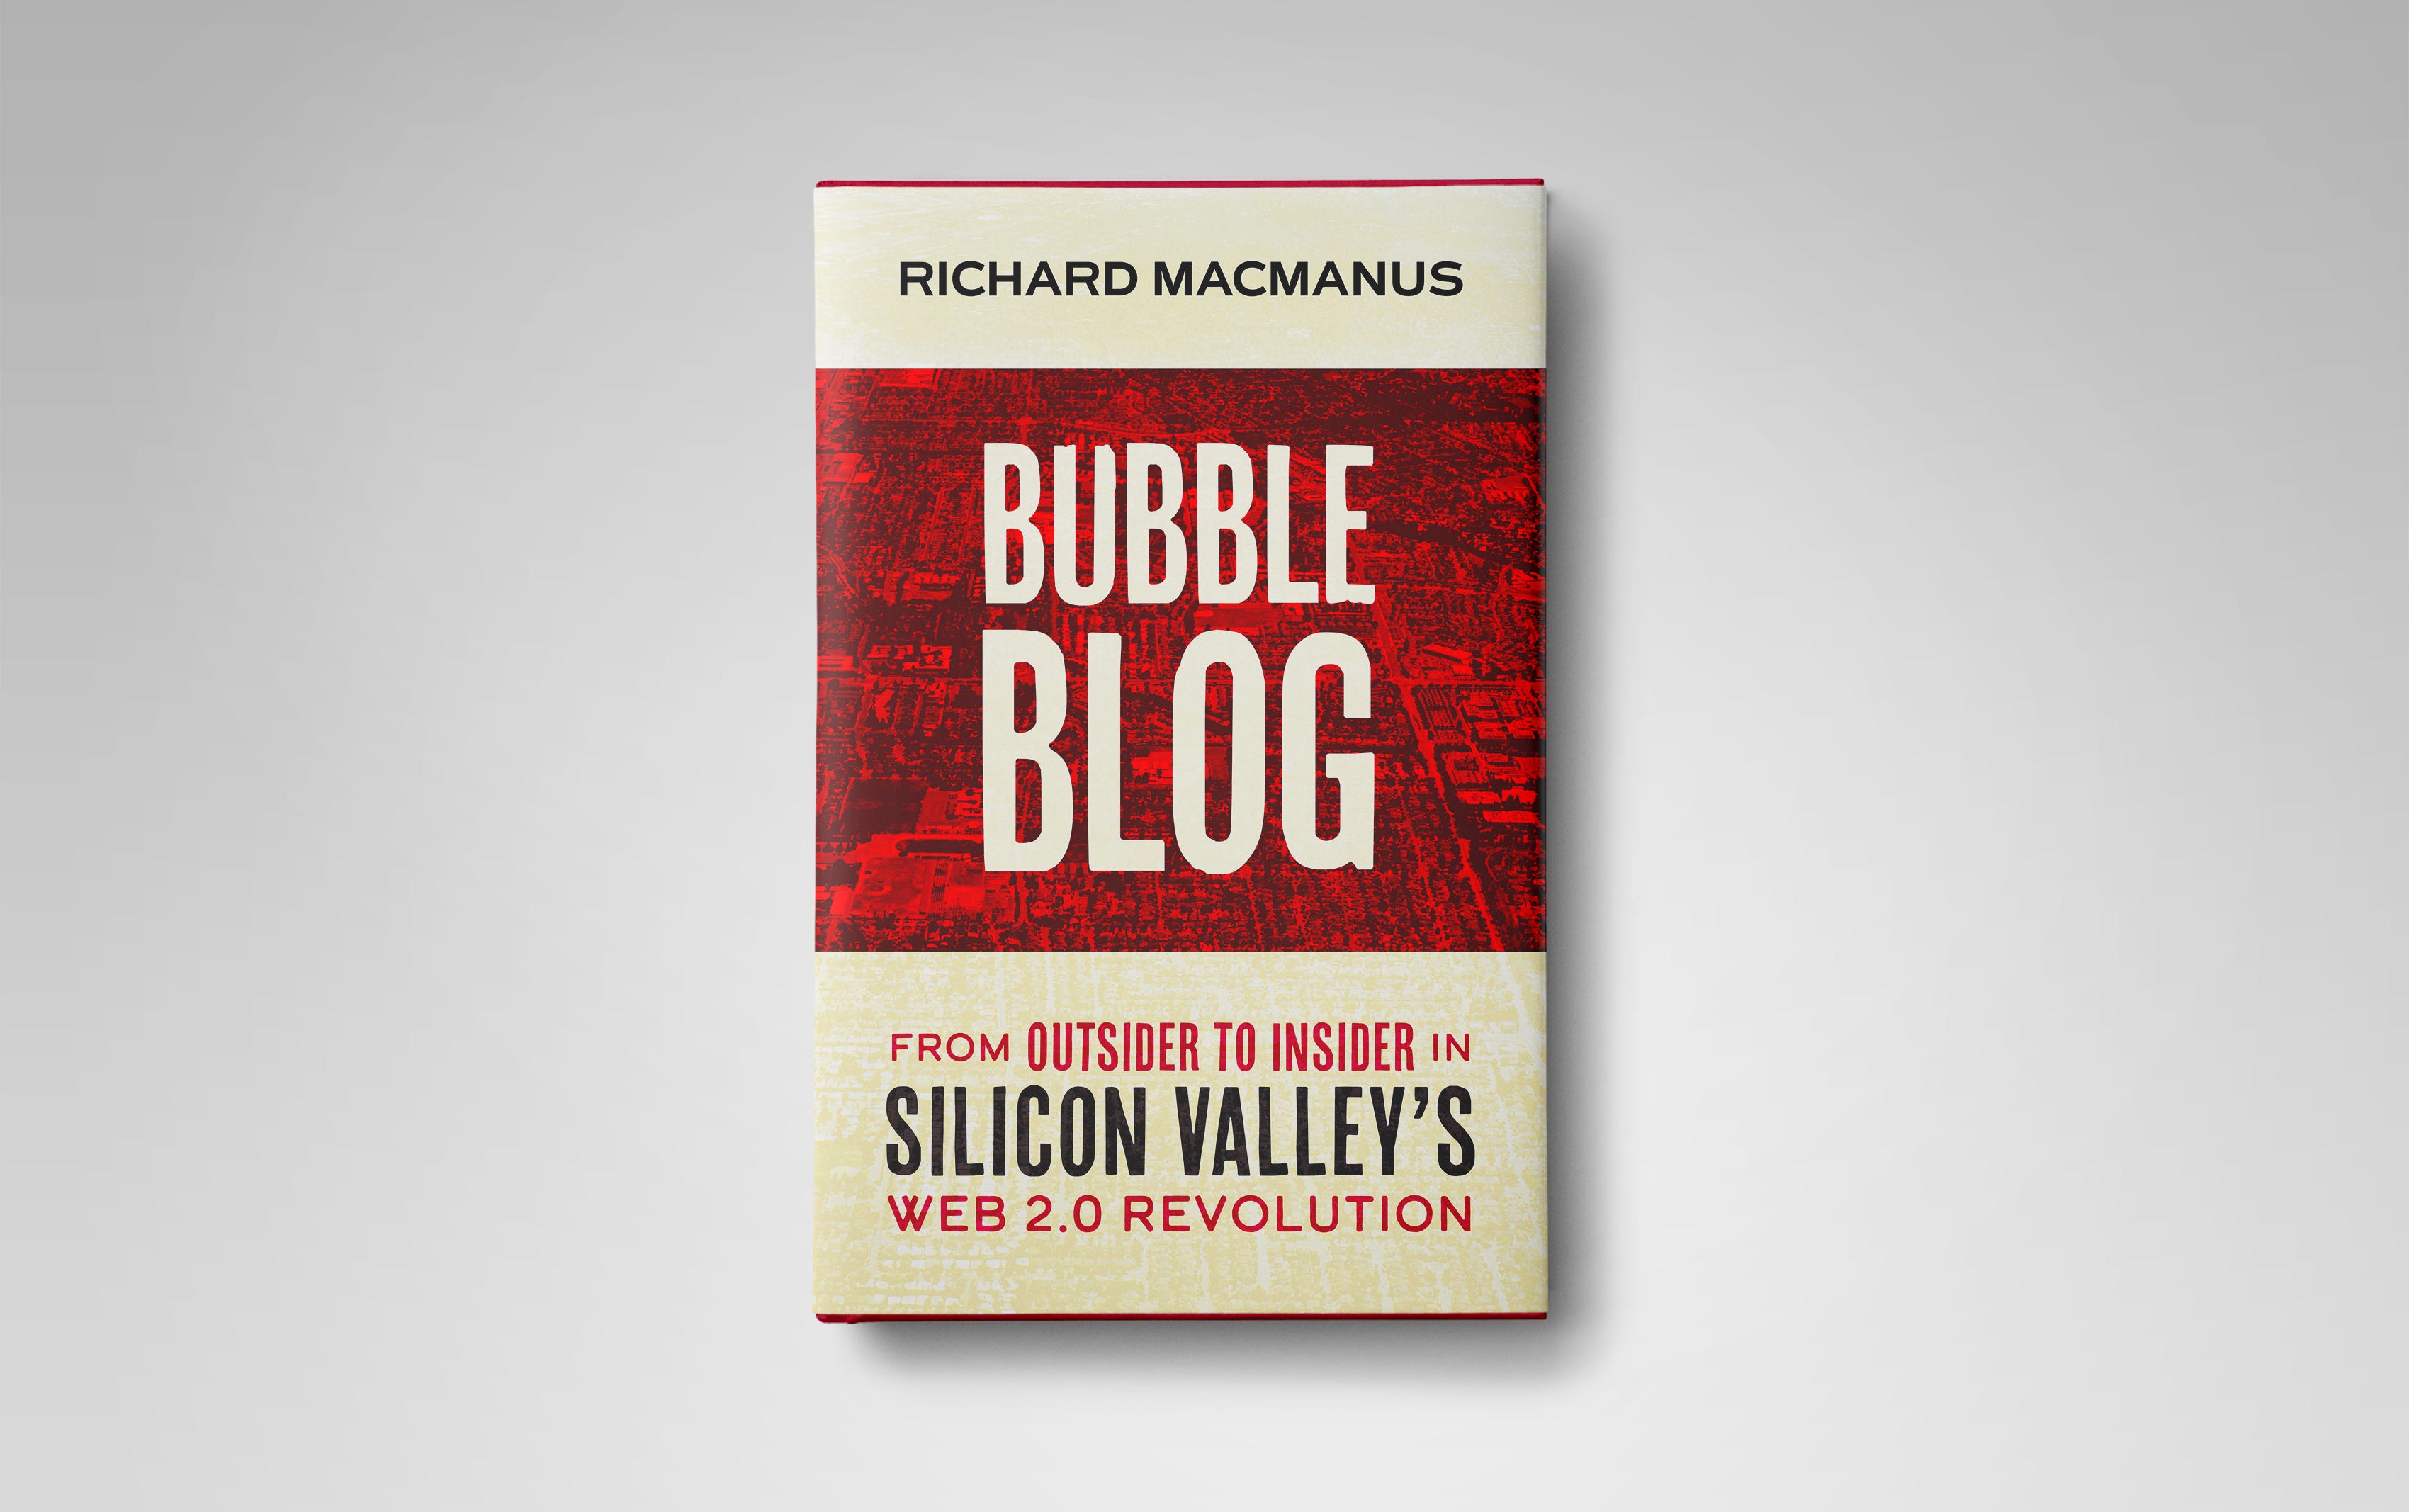 001. Introduction to Bubble Blog